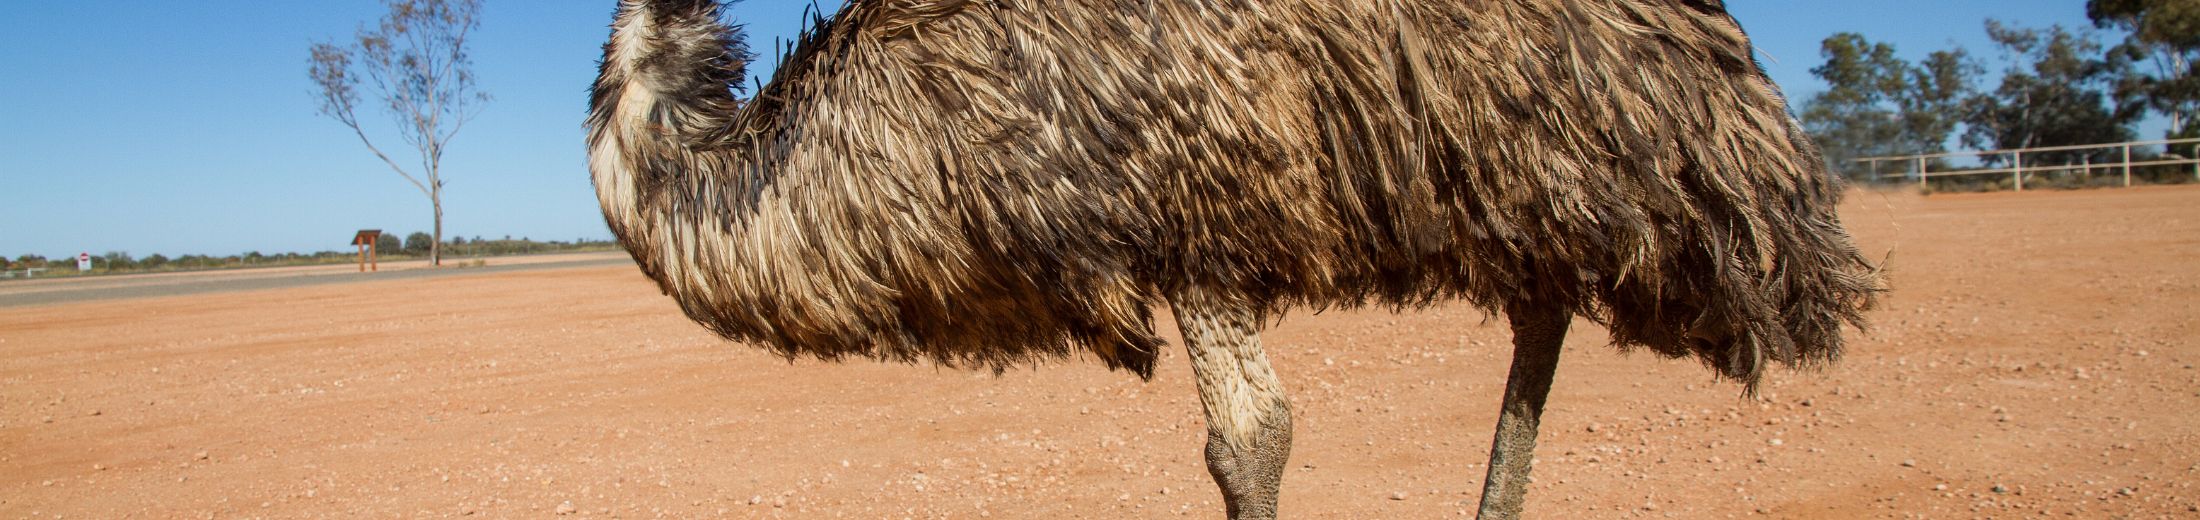 How Much Does Emu Cost